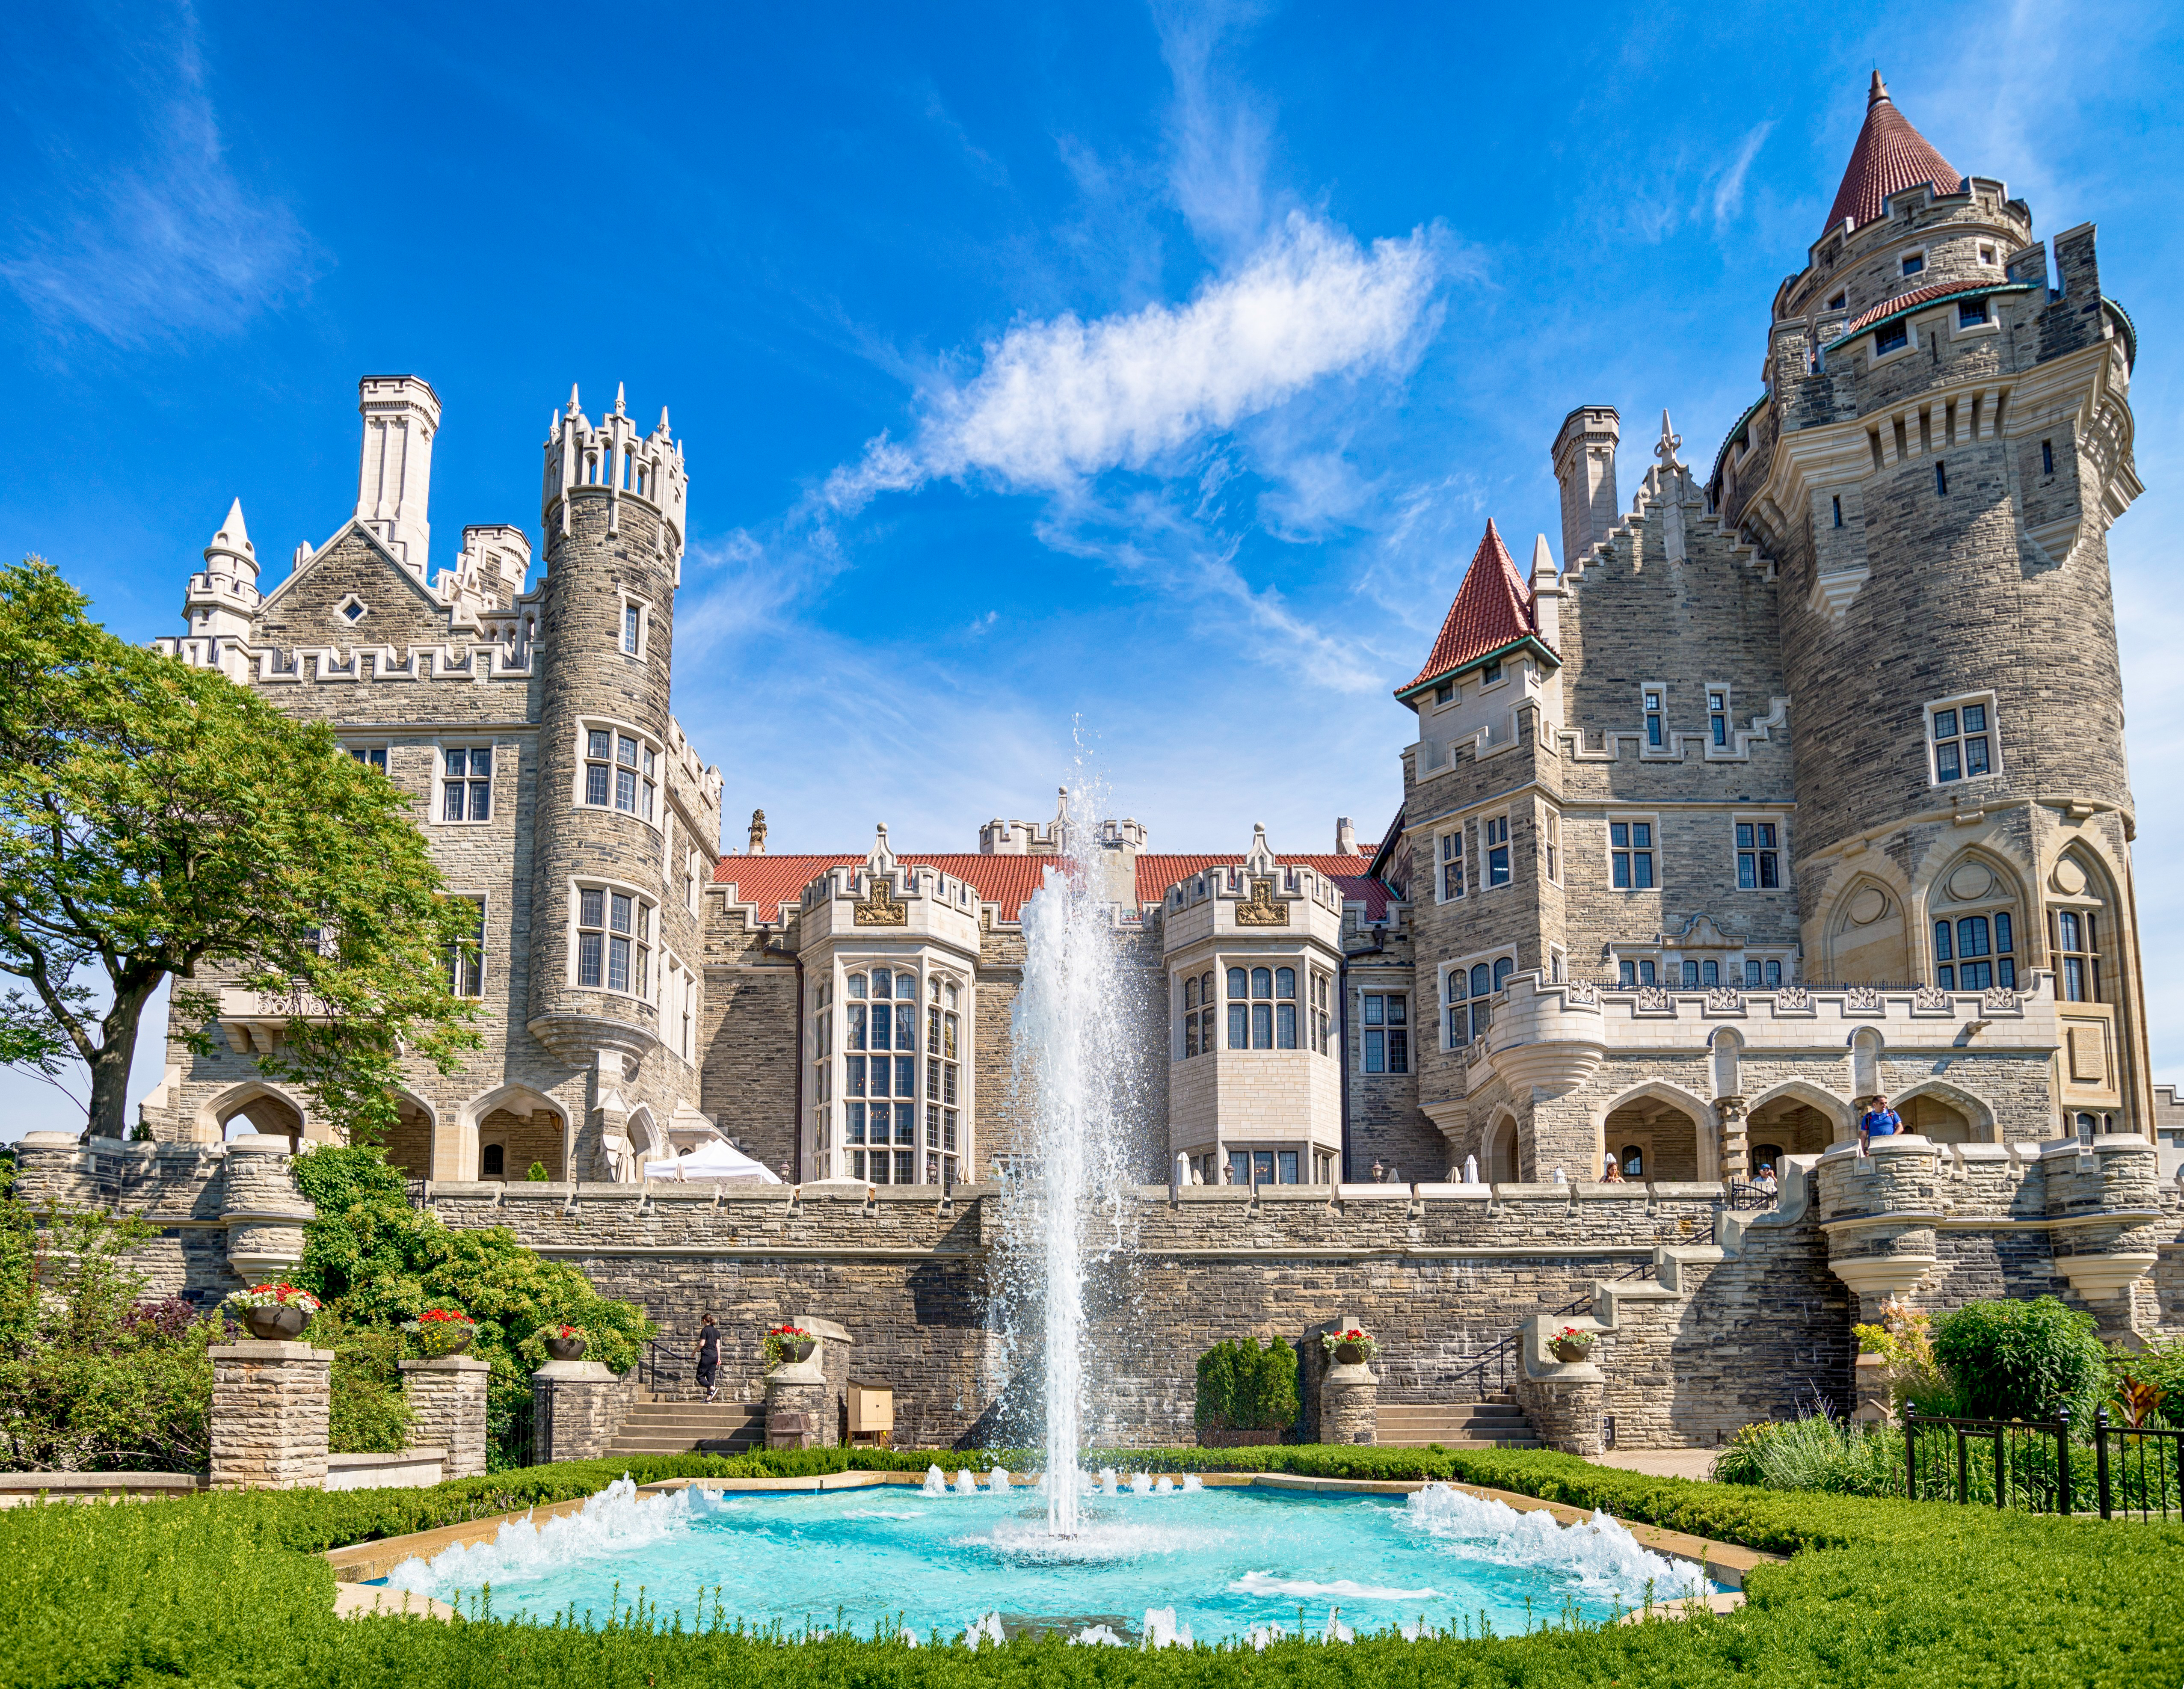 Best Attractions in Toronto - Casa Loma